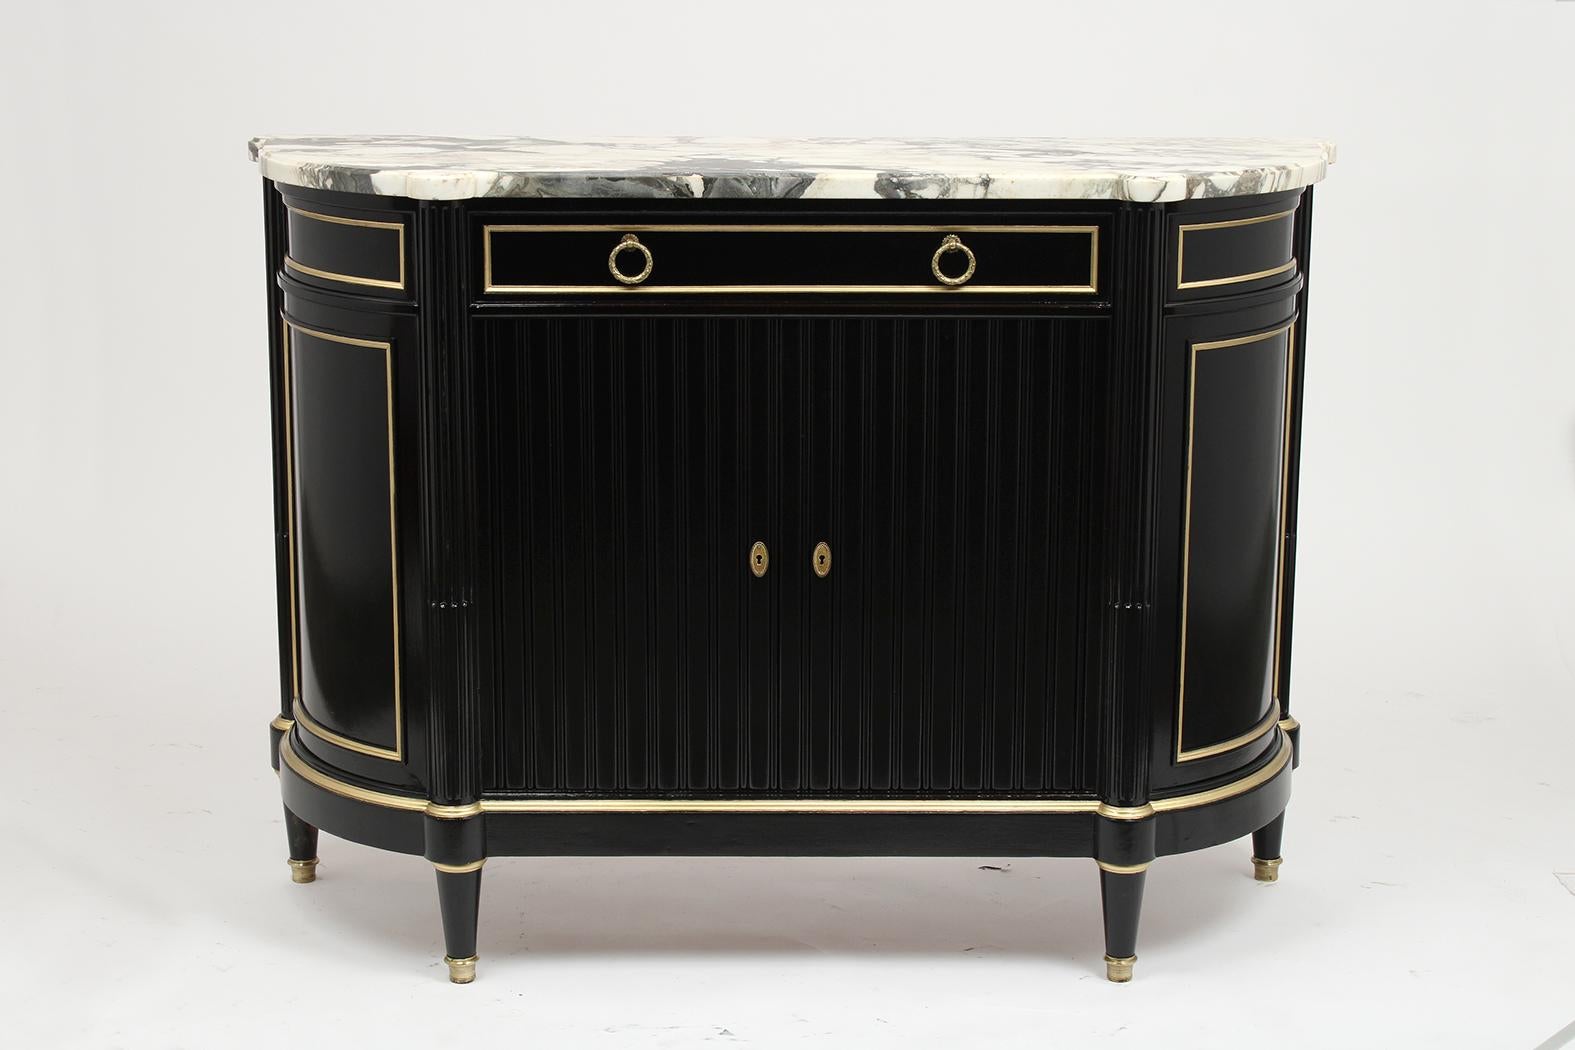 This antique French Louis XVI style server is made out of mahogany wood and comes with its original beveled marble top. This server has been professionally refinished in ebonized color, gilt molding accents, and a lacquered finish. This server has a